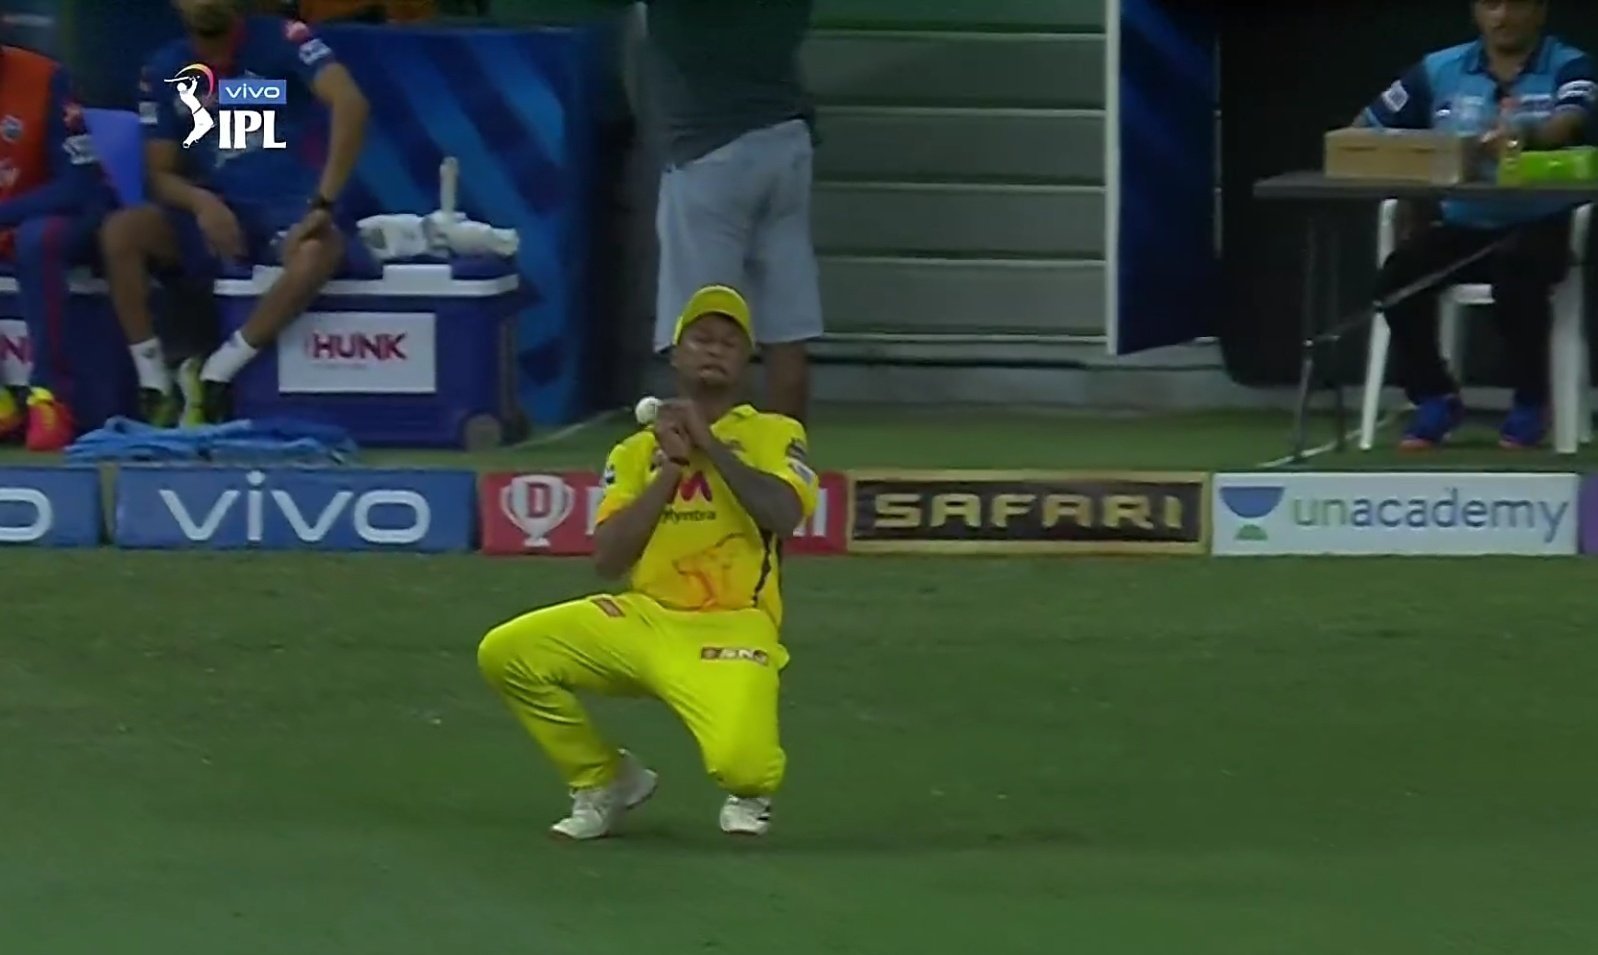 CSK Gowtham misses Hetmyer catch at crucial time against DC